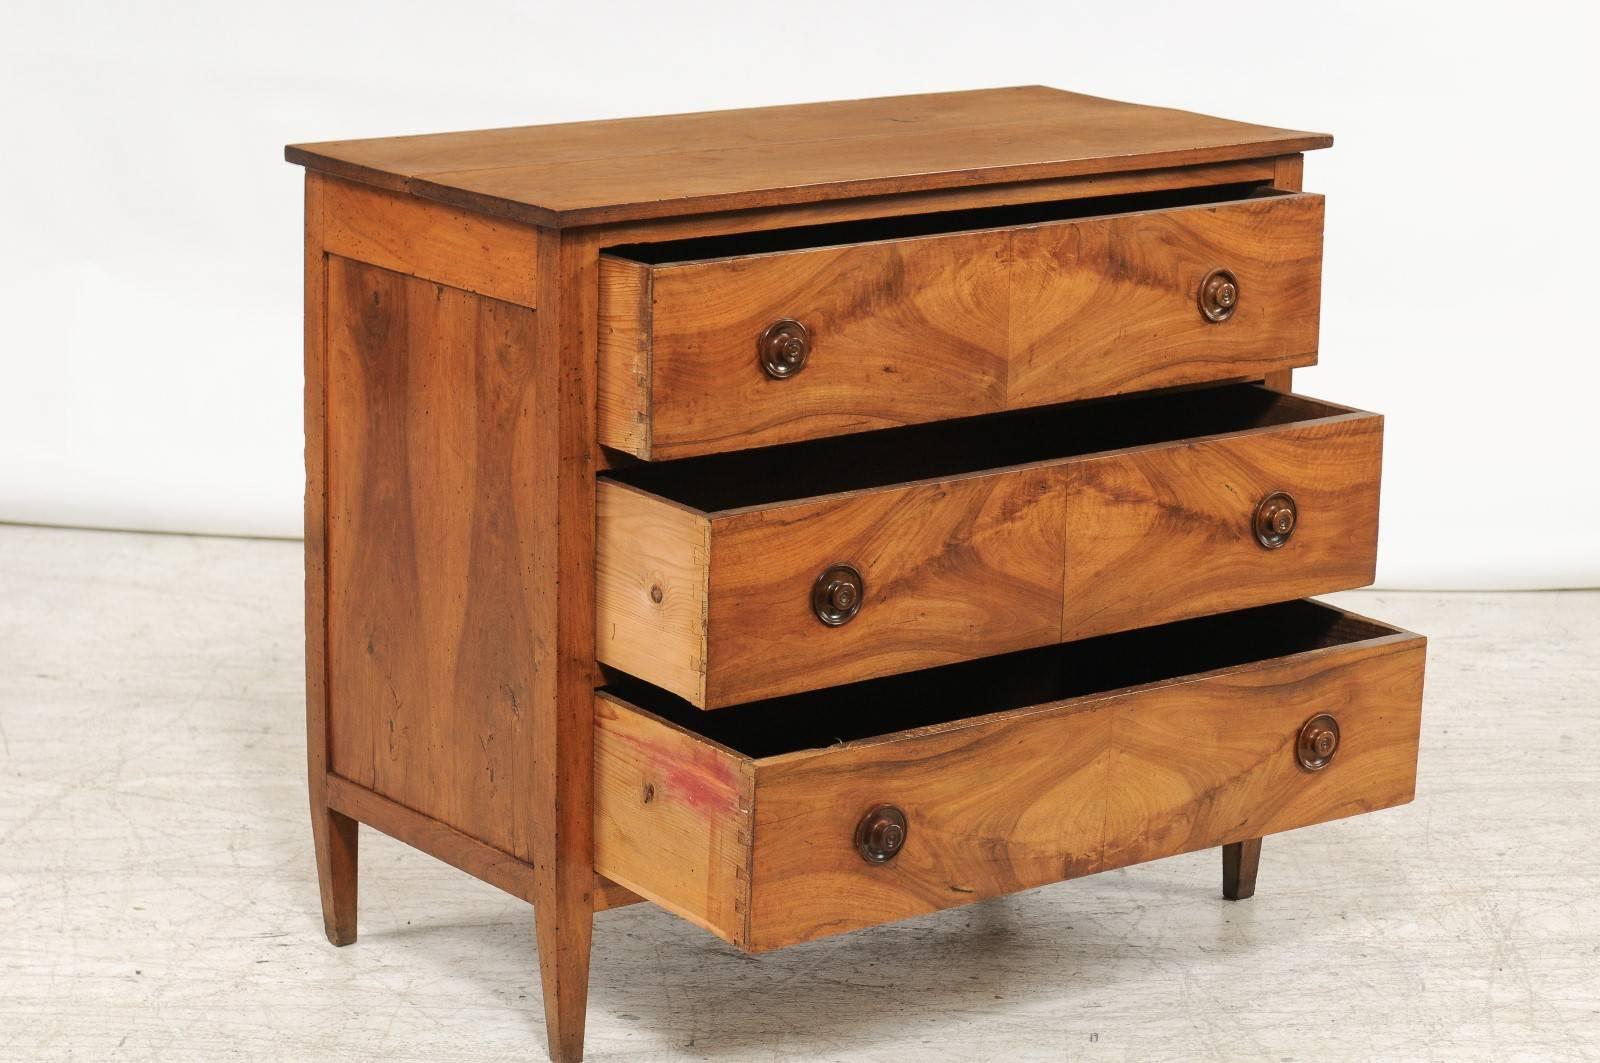 18th Century French Directoire Period Three-Drawer Chest with Bookmarked Walnut Veneer